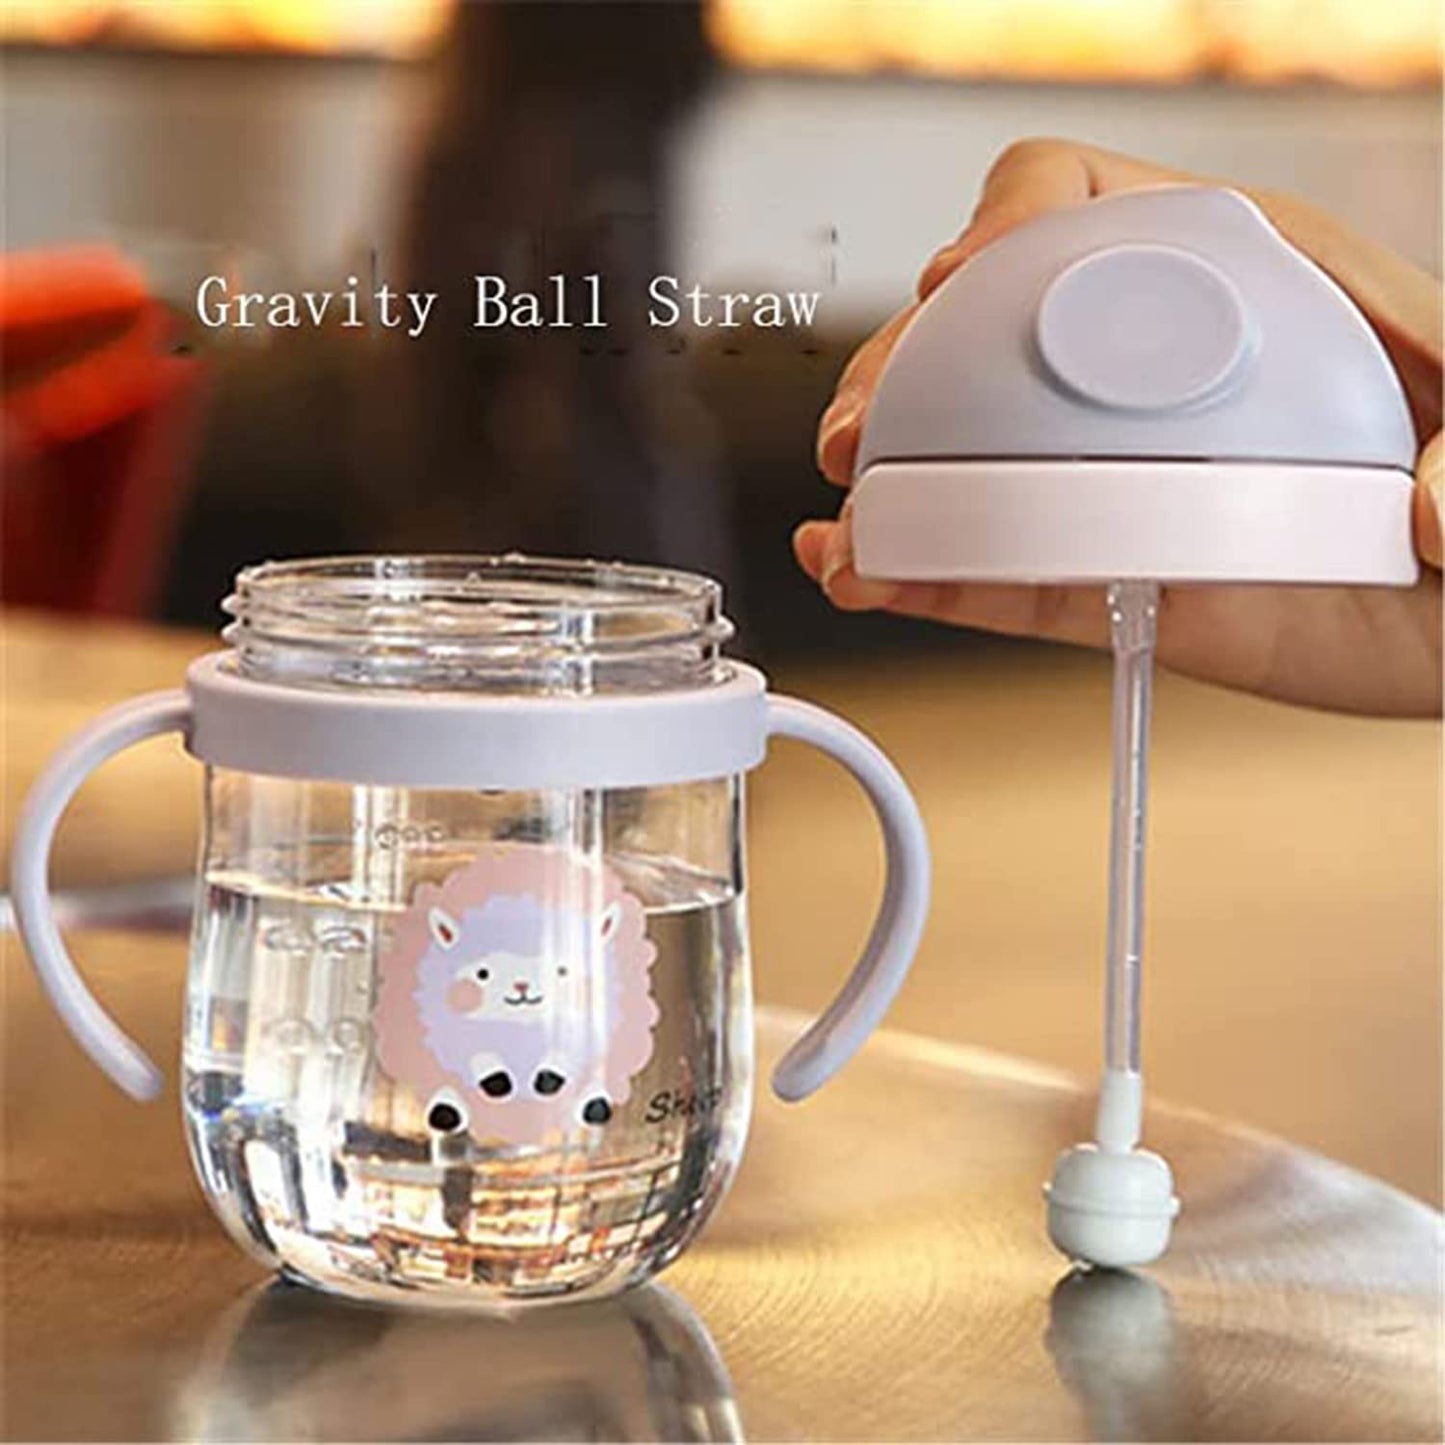 Sippy Cup for Baby, Sippy Cup for Baby more than 6 months, KASTWAVESpill-Proof Sippy Cup, Toddler Cup with Straw and Handle, Anti-drop, Anti-leakage, Anti-choking for Boys Girls Child ( 300ml )